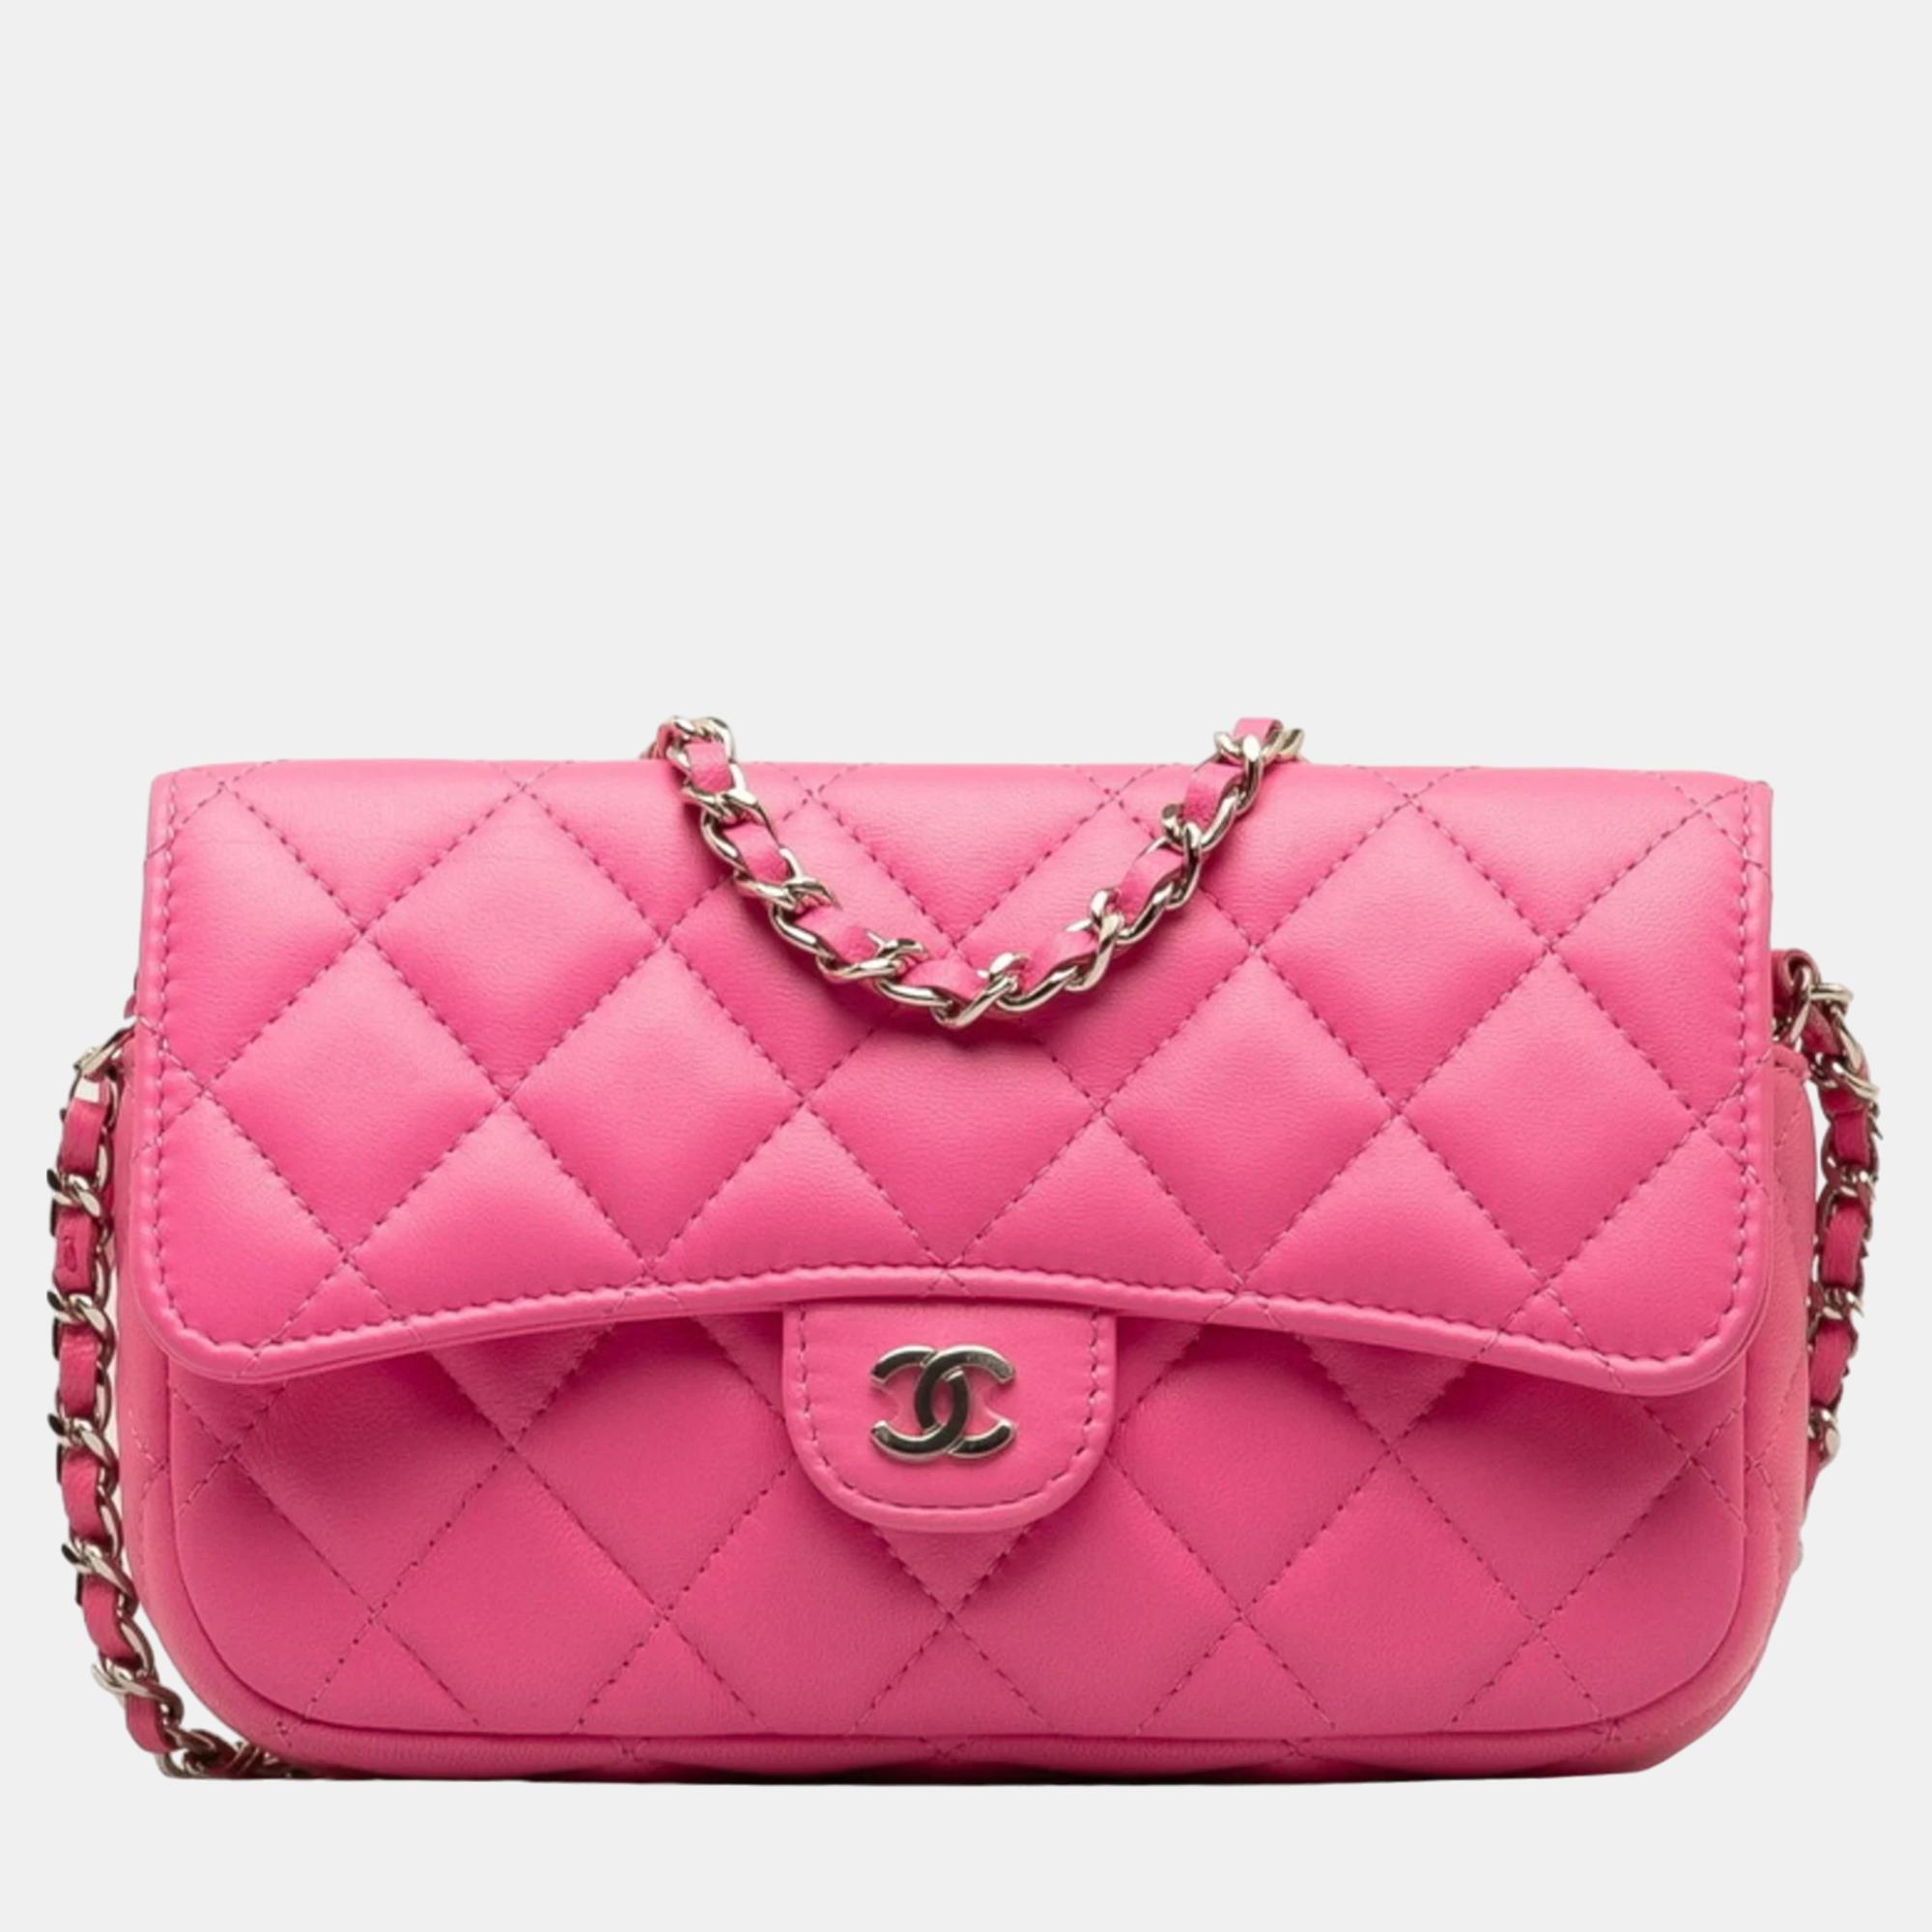 Chanel pink leather phone flap clutch on chain